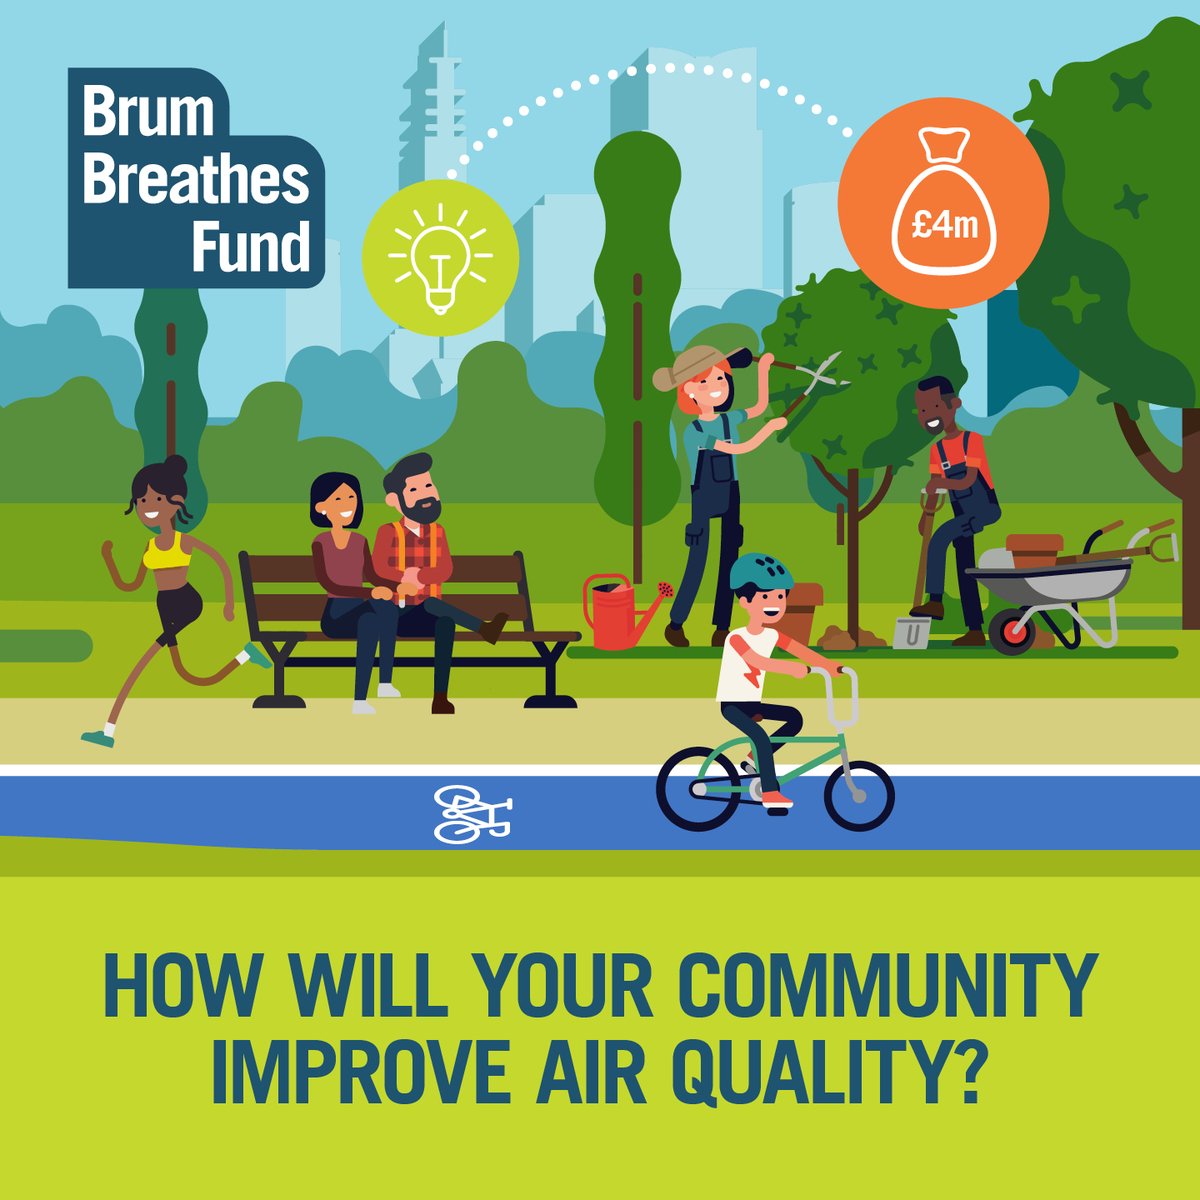 Do you have a plan to improve air quality where you live? 

Apply to the #BrumBreathesFund and you could get a slice of £4m of funding to make it happen.

Find out more at orlo.uk/jkt6S